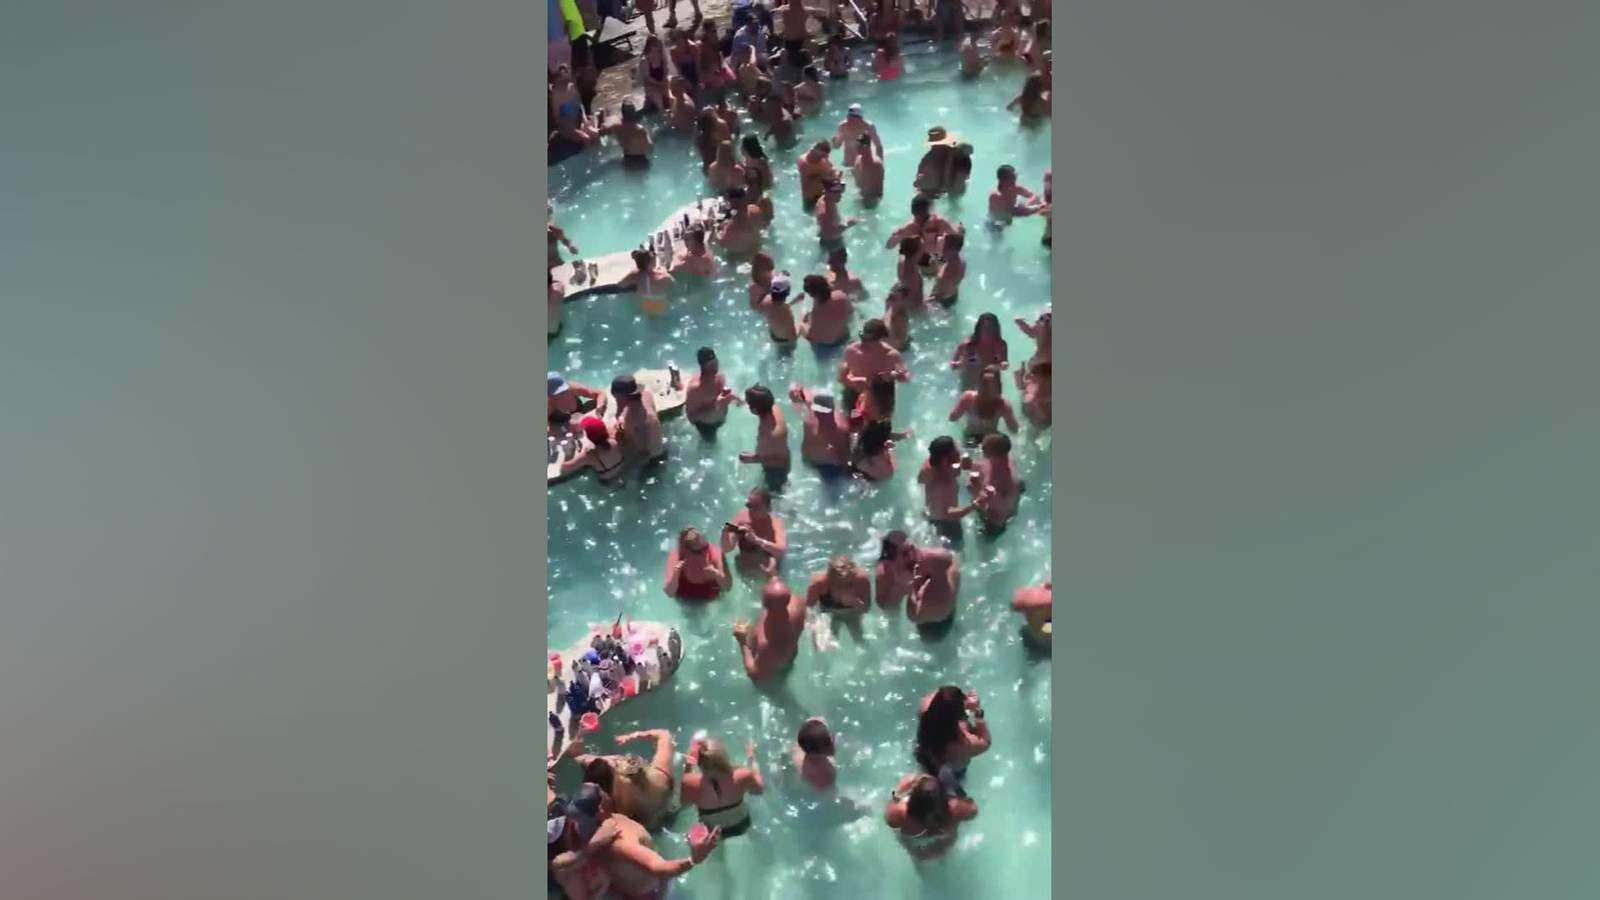 VIDEO: Pool party at Lake of the Ozarks in Missouri draws a packed crowd despite social distancing policies